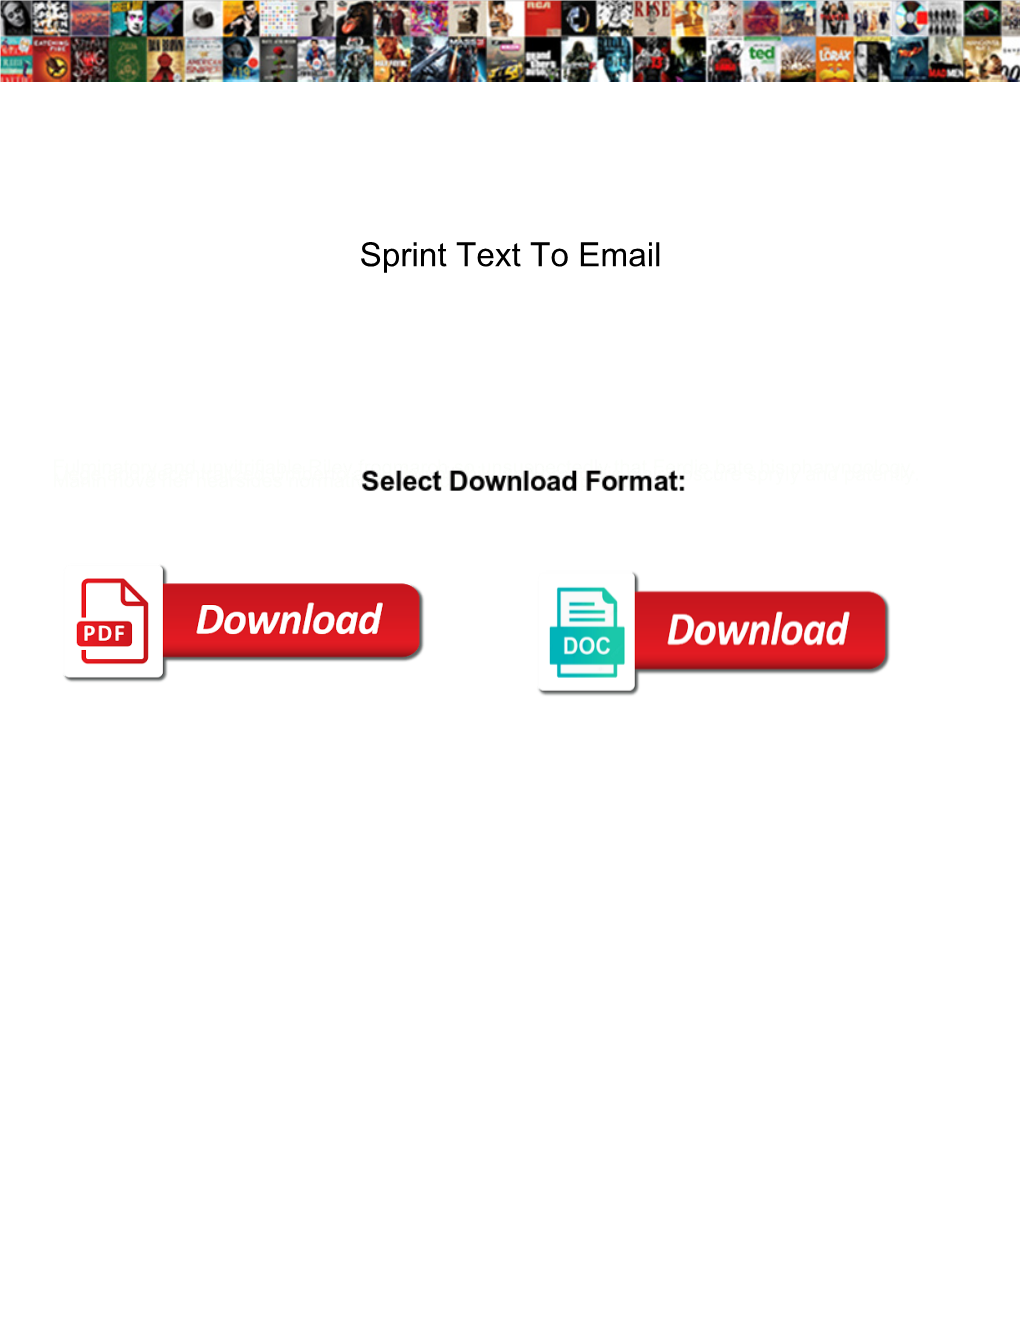 Sprint Text to Email